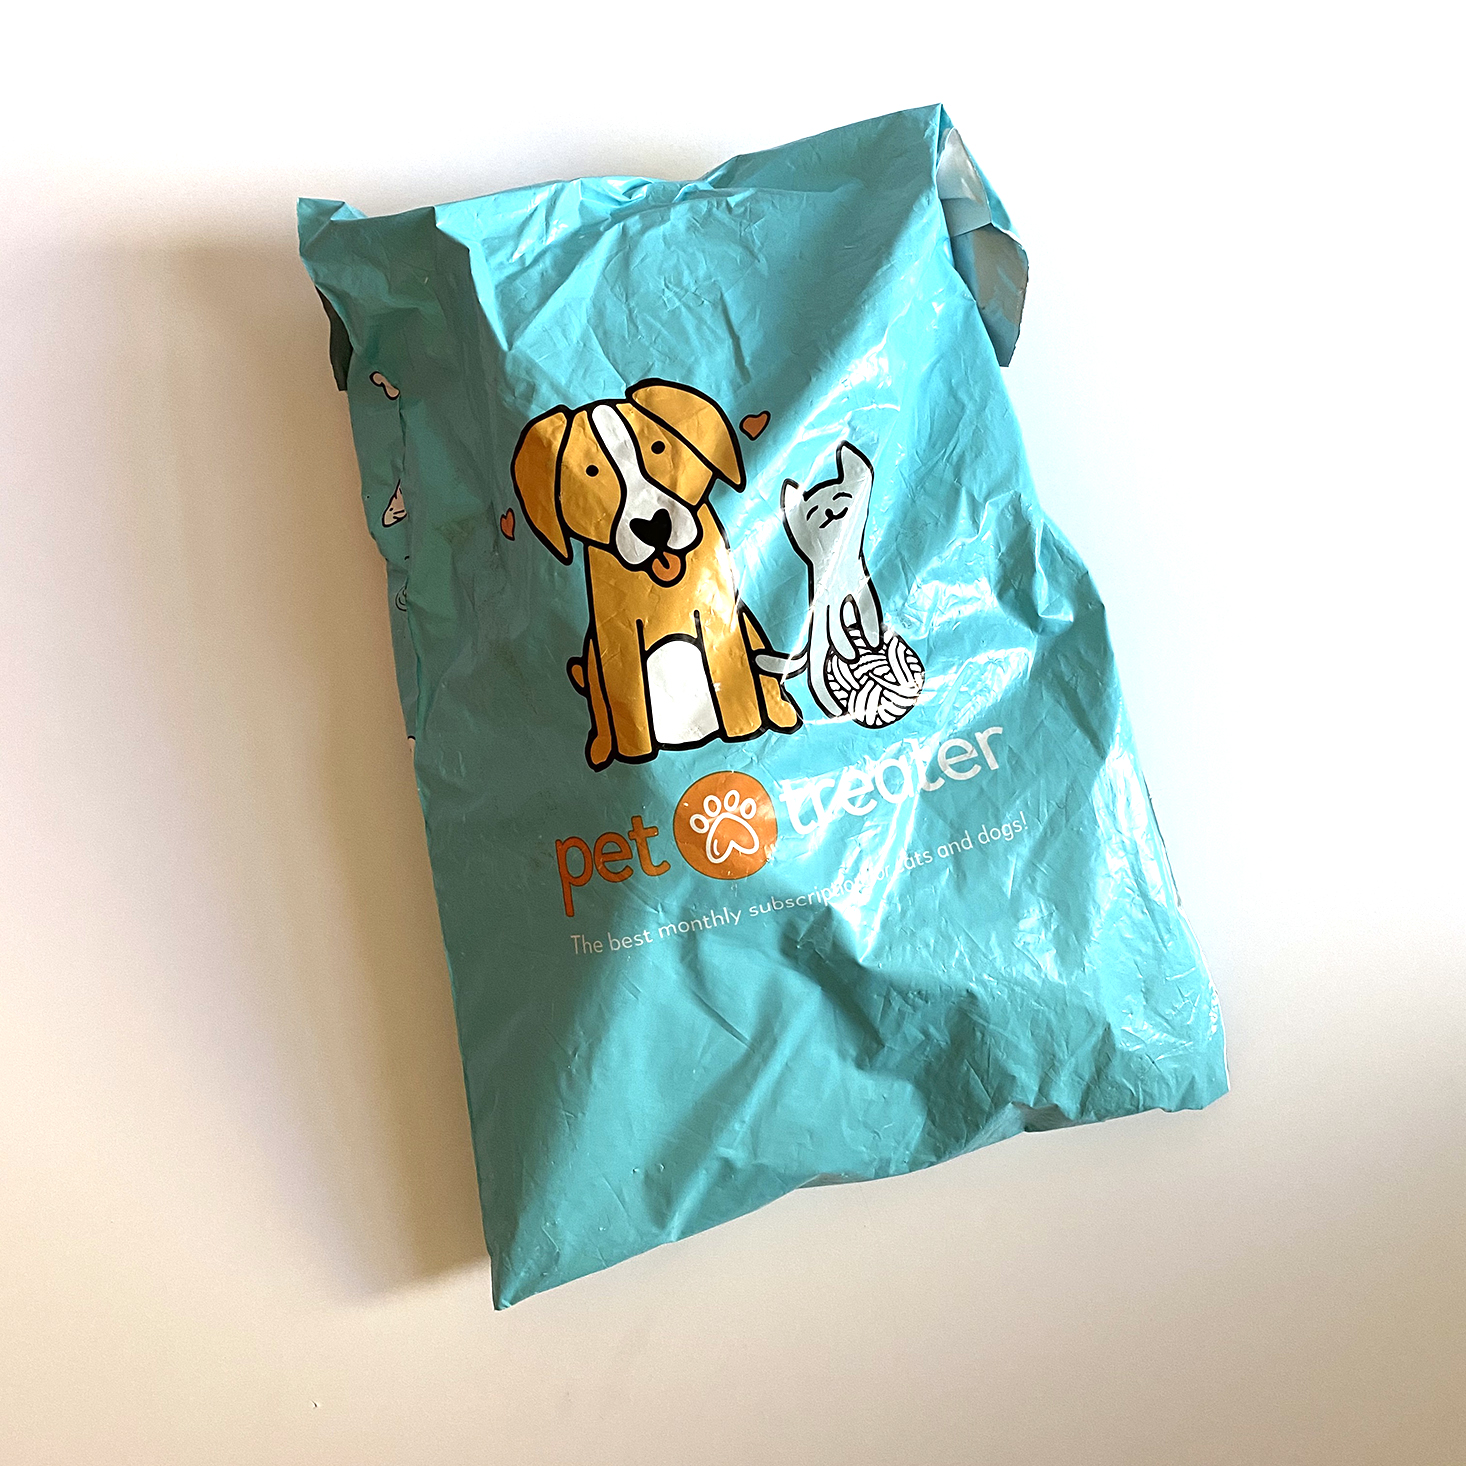 Pet Treater Dog Pack Subscription Review – July 2020